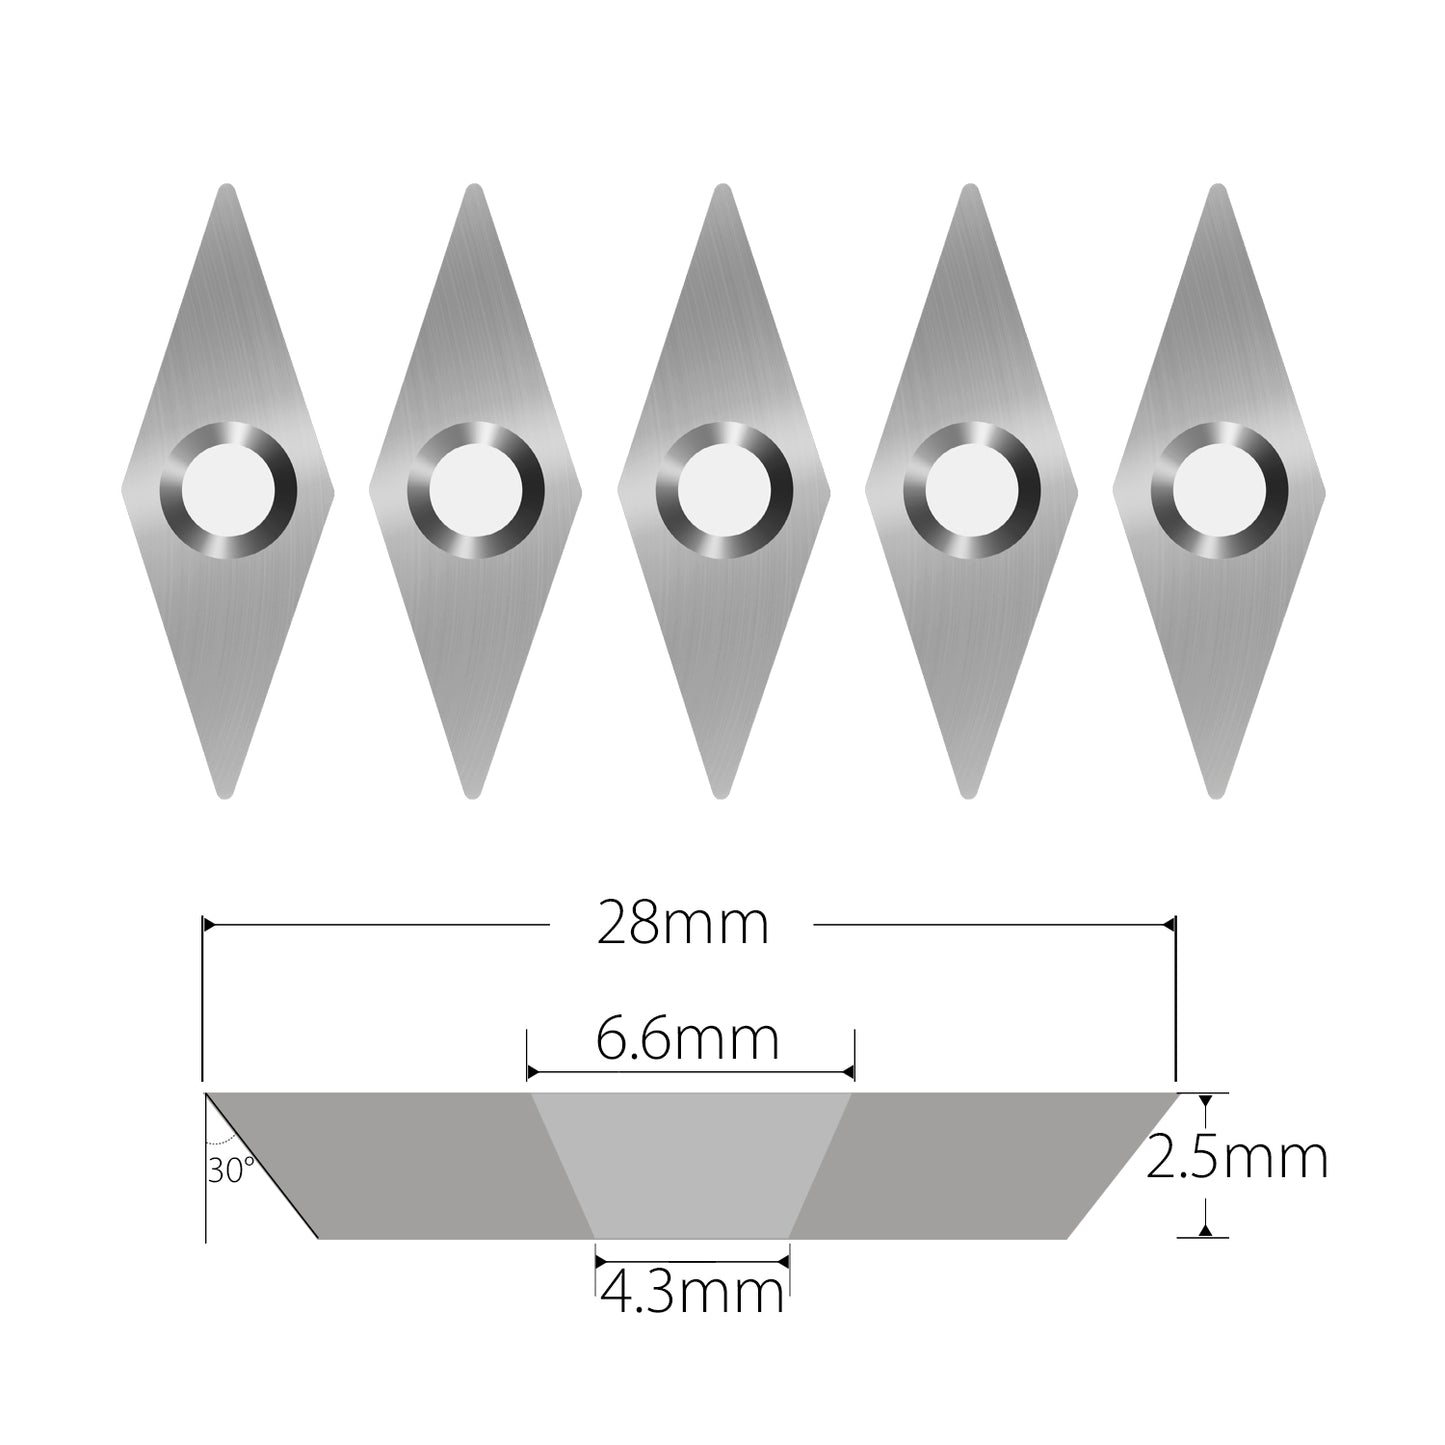 Woodturning Diamond Shape VEMN160208  Indexable  Ci4 Carbide Insert Knife Replacement Cutter for EWT  Detailer Wood Turning Tools